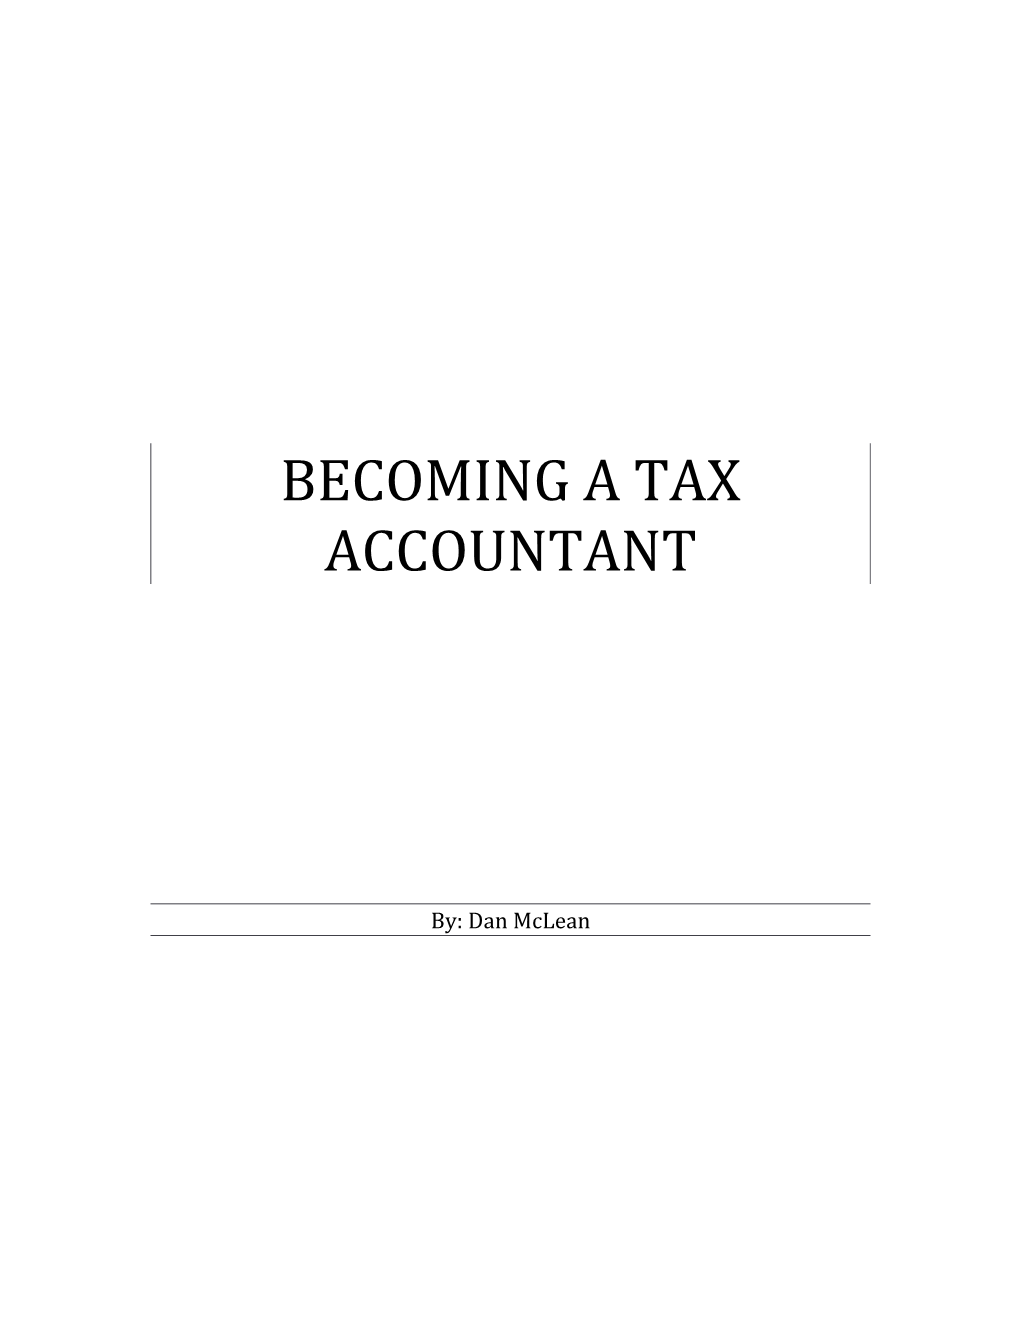 Becoming a Tax Accountant